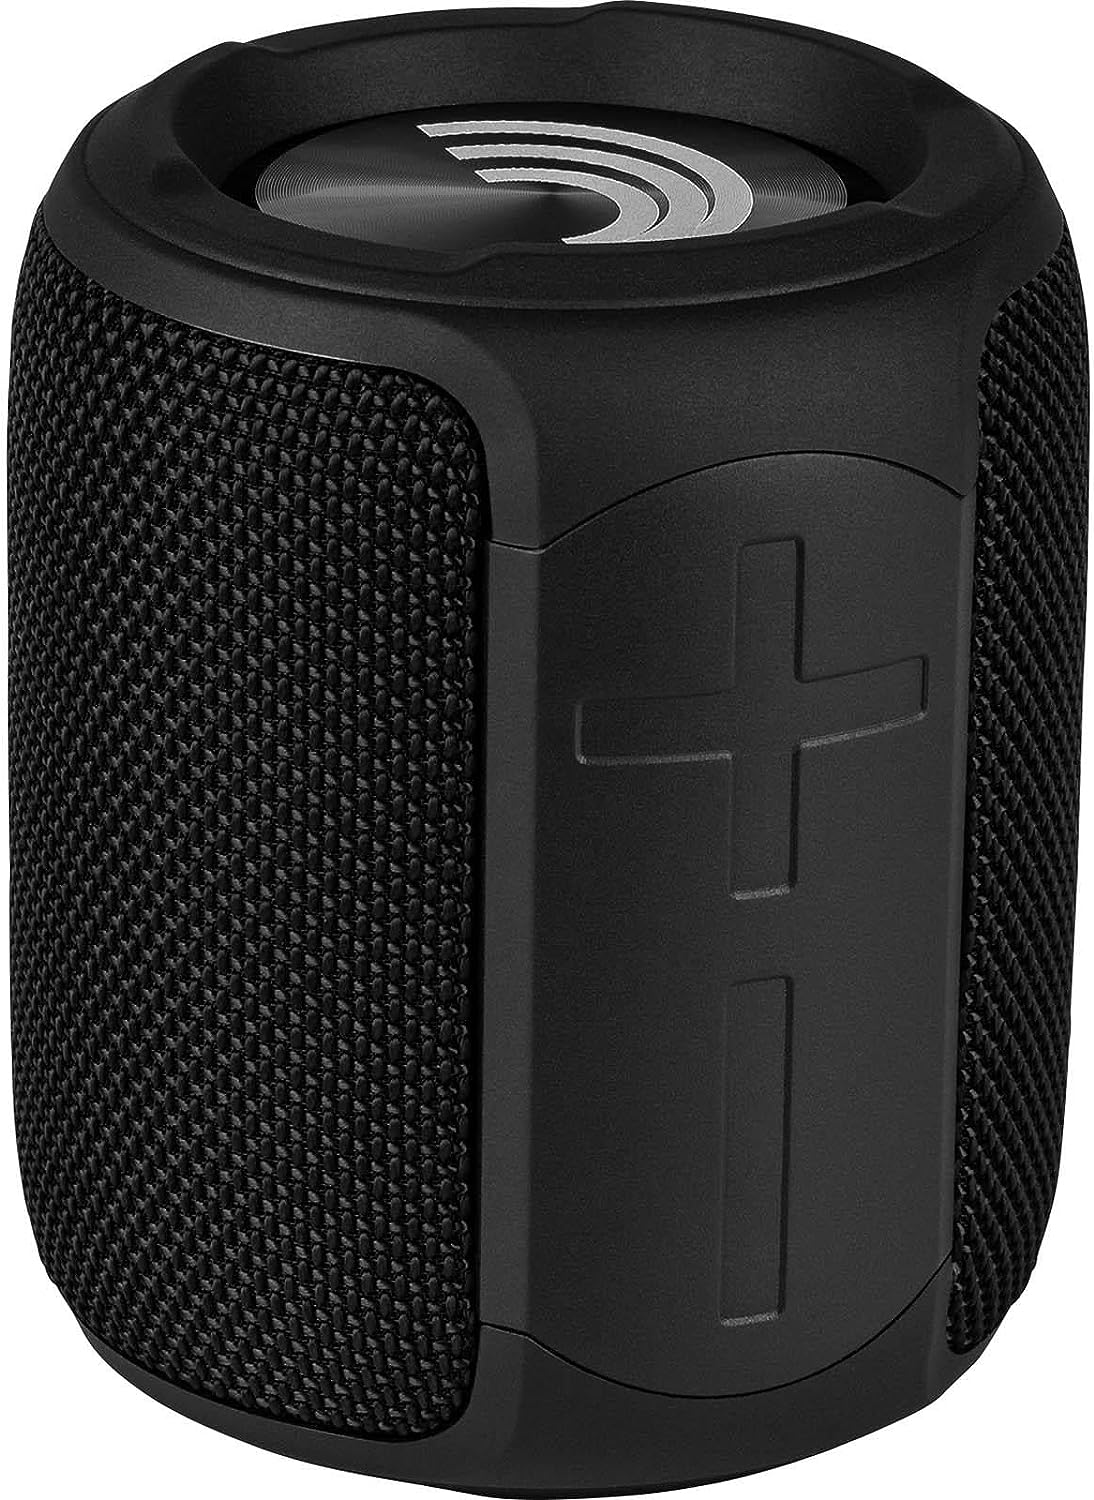 Dayton Audio Boost Portable Bluetooth Speaker, IPX5 Water-Resistant, Bluetooth 5.0, Durable, Indoor/Outdoor use�